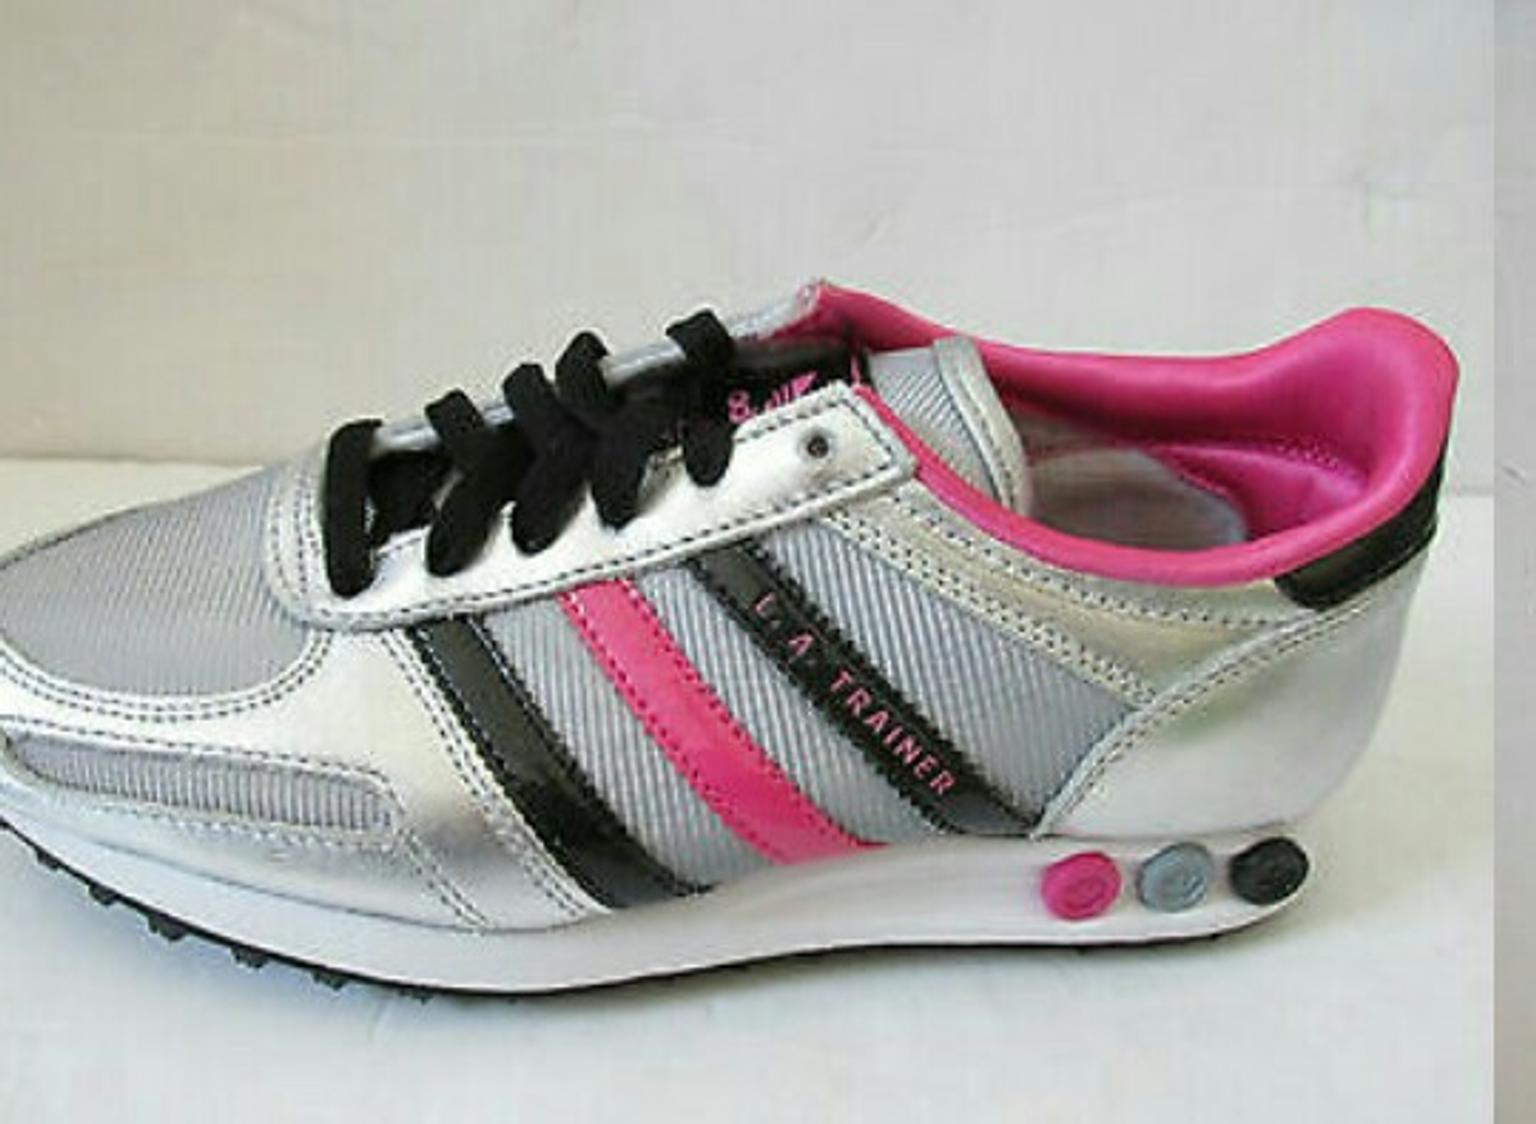 women adidas trainers in B19 Birmingham for £45.00 for sale | Shpock